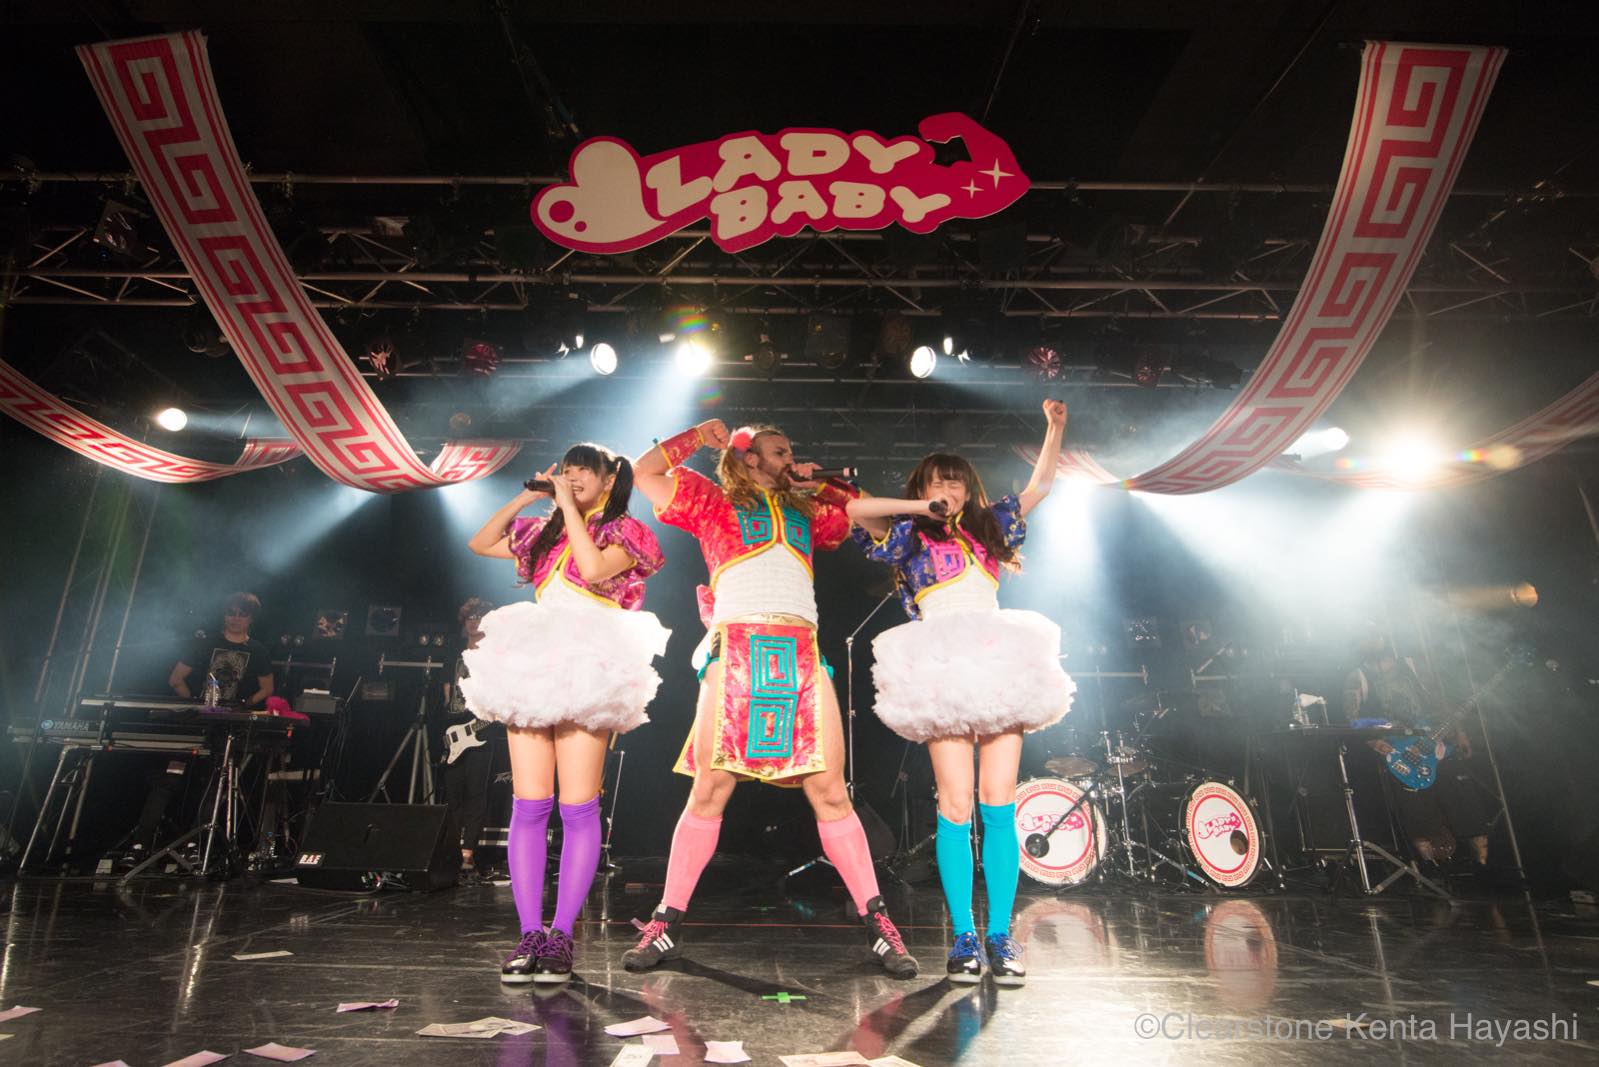 “We Will Definitely Be Back!” LADYBABY Promises to Power Up Even More During 1st Japan One-Man Live at Shinjuku BLAZE